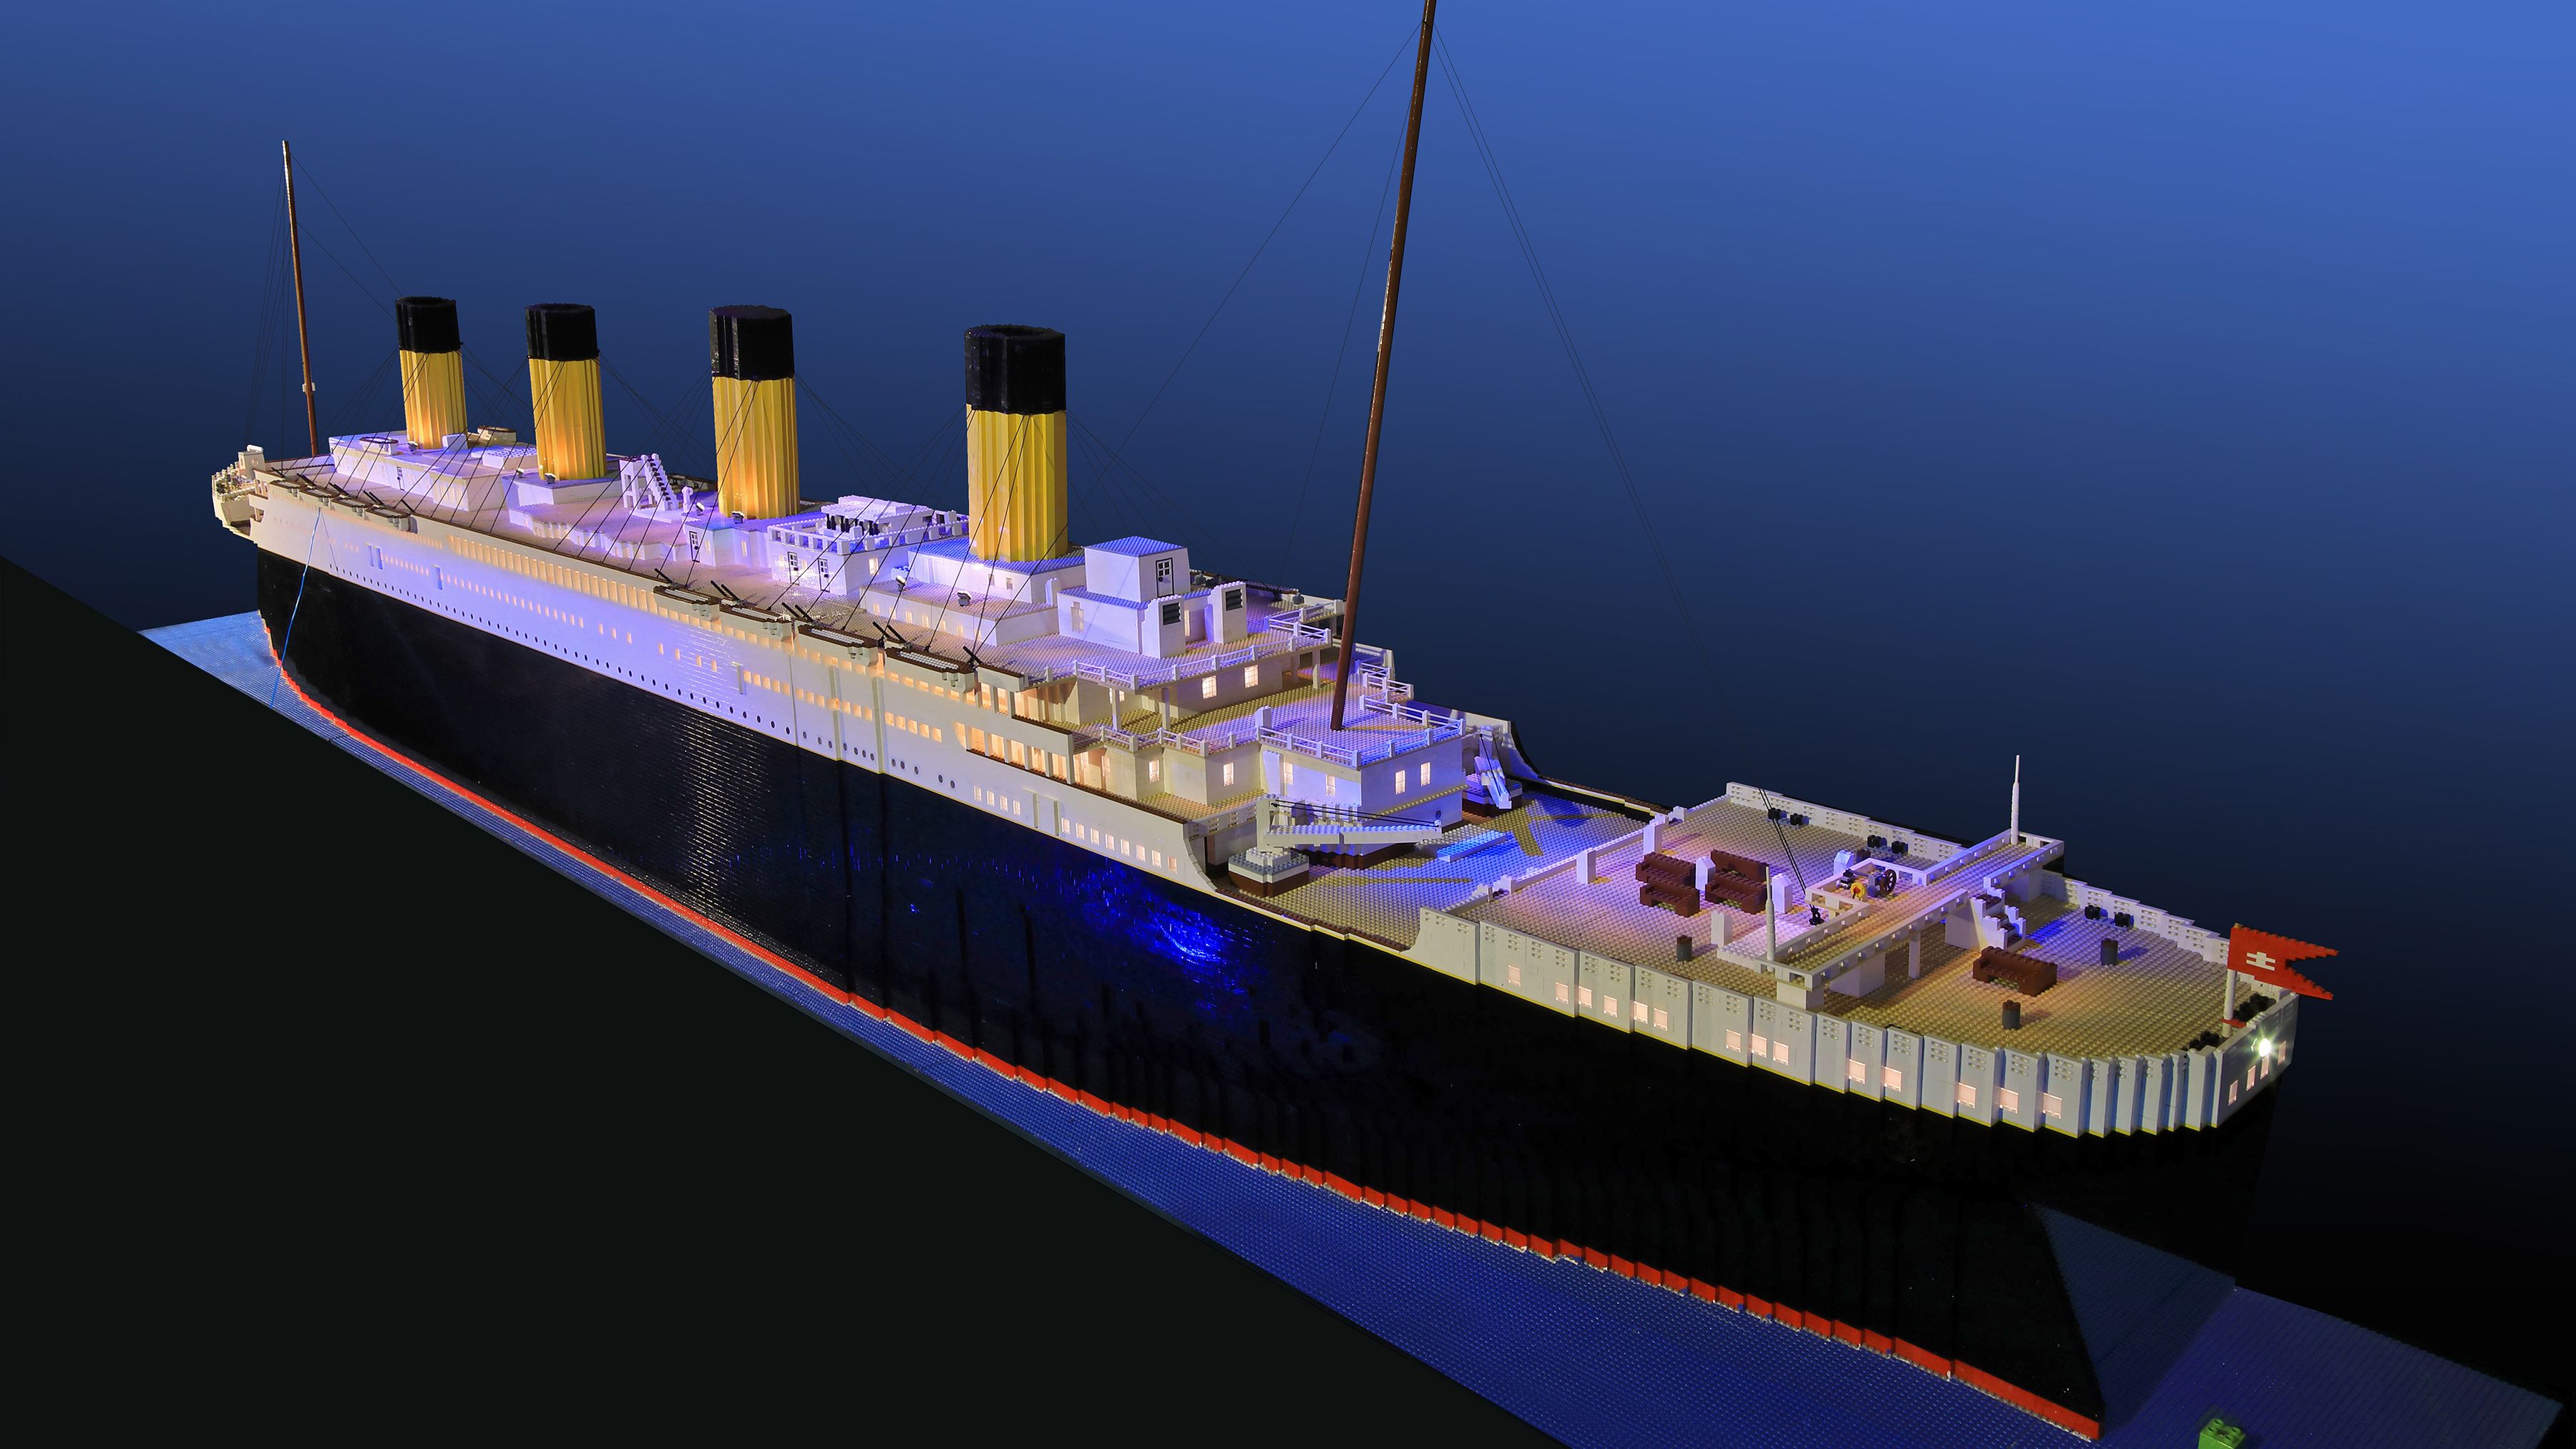 Boy with autism builds world's largest Lego Titanic replica | CNN